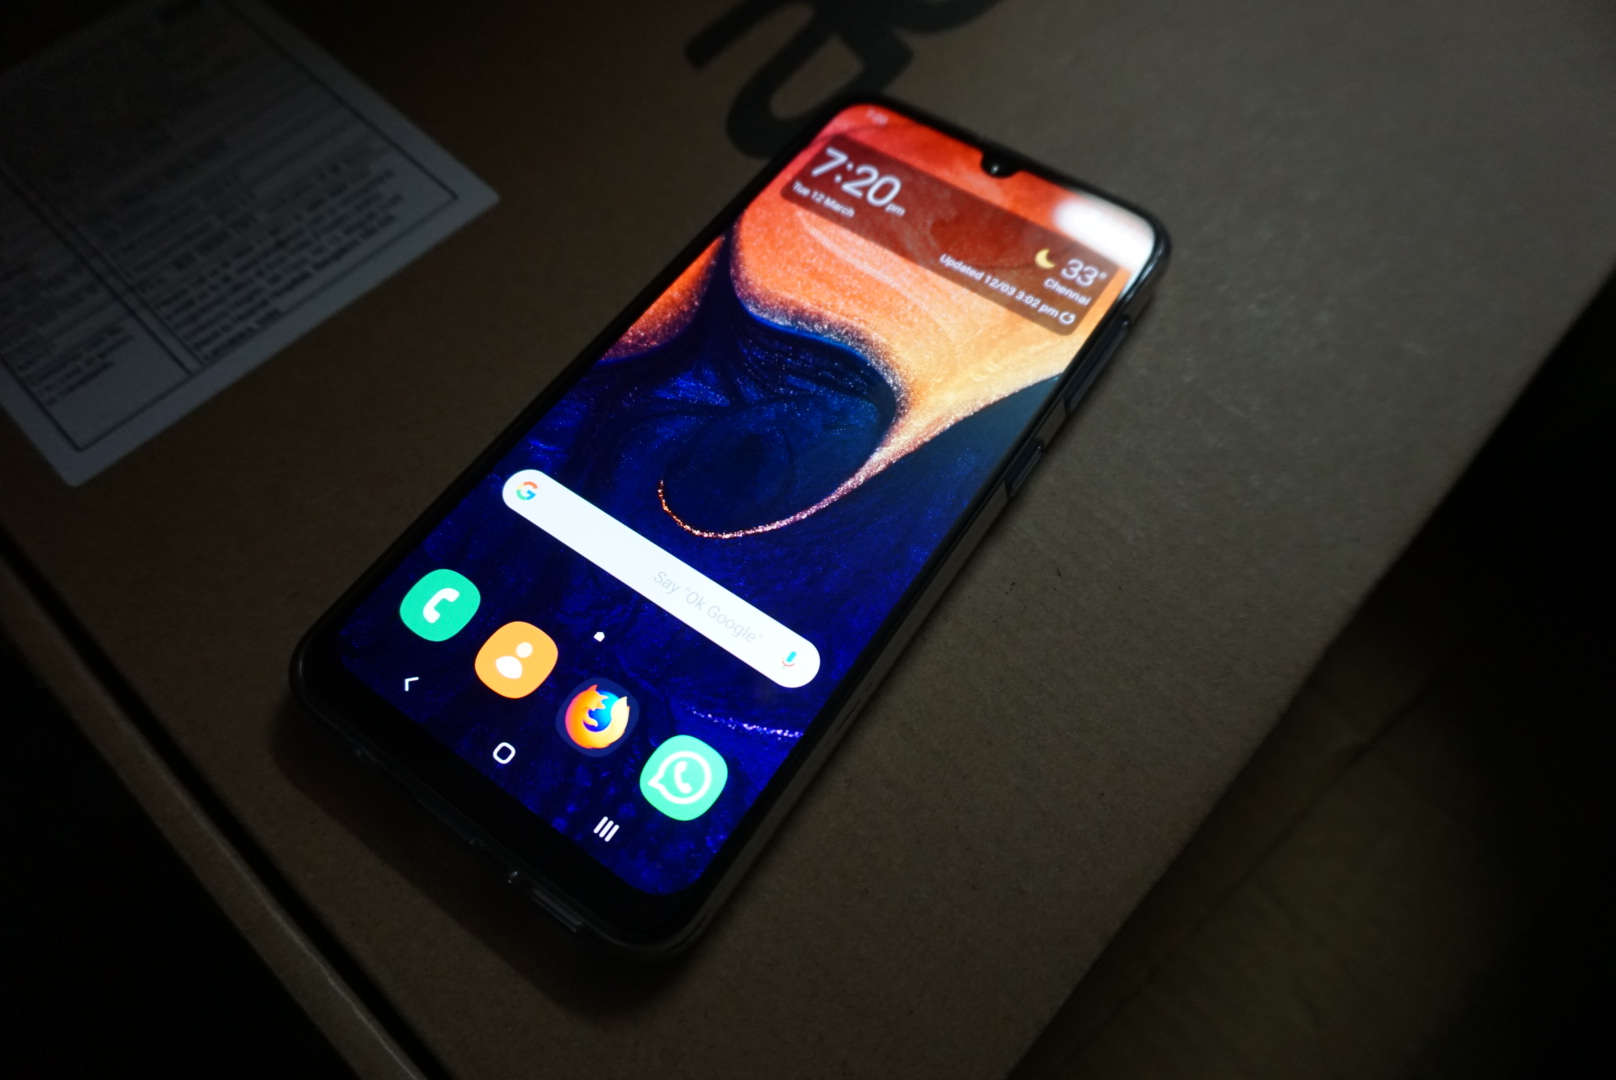 Samsung Galaxy A50 October security update rolls out, September OTA skipped